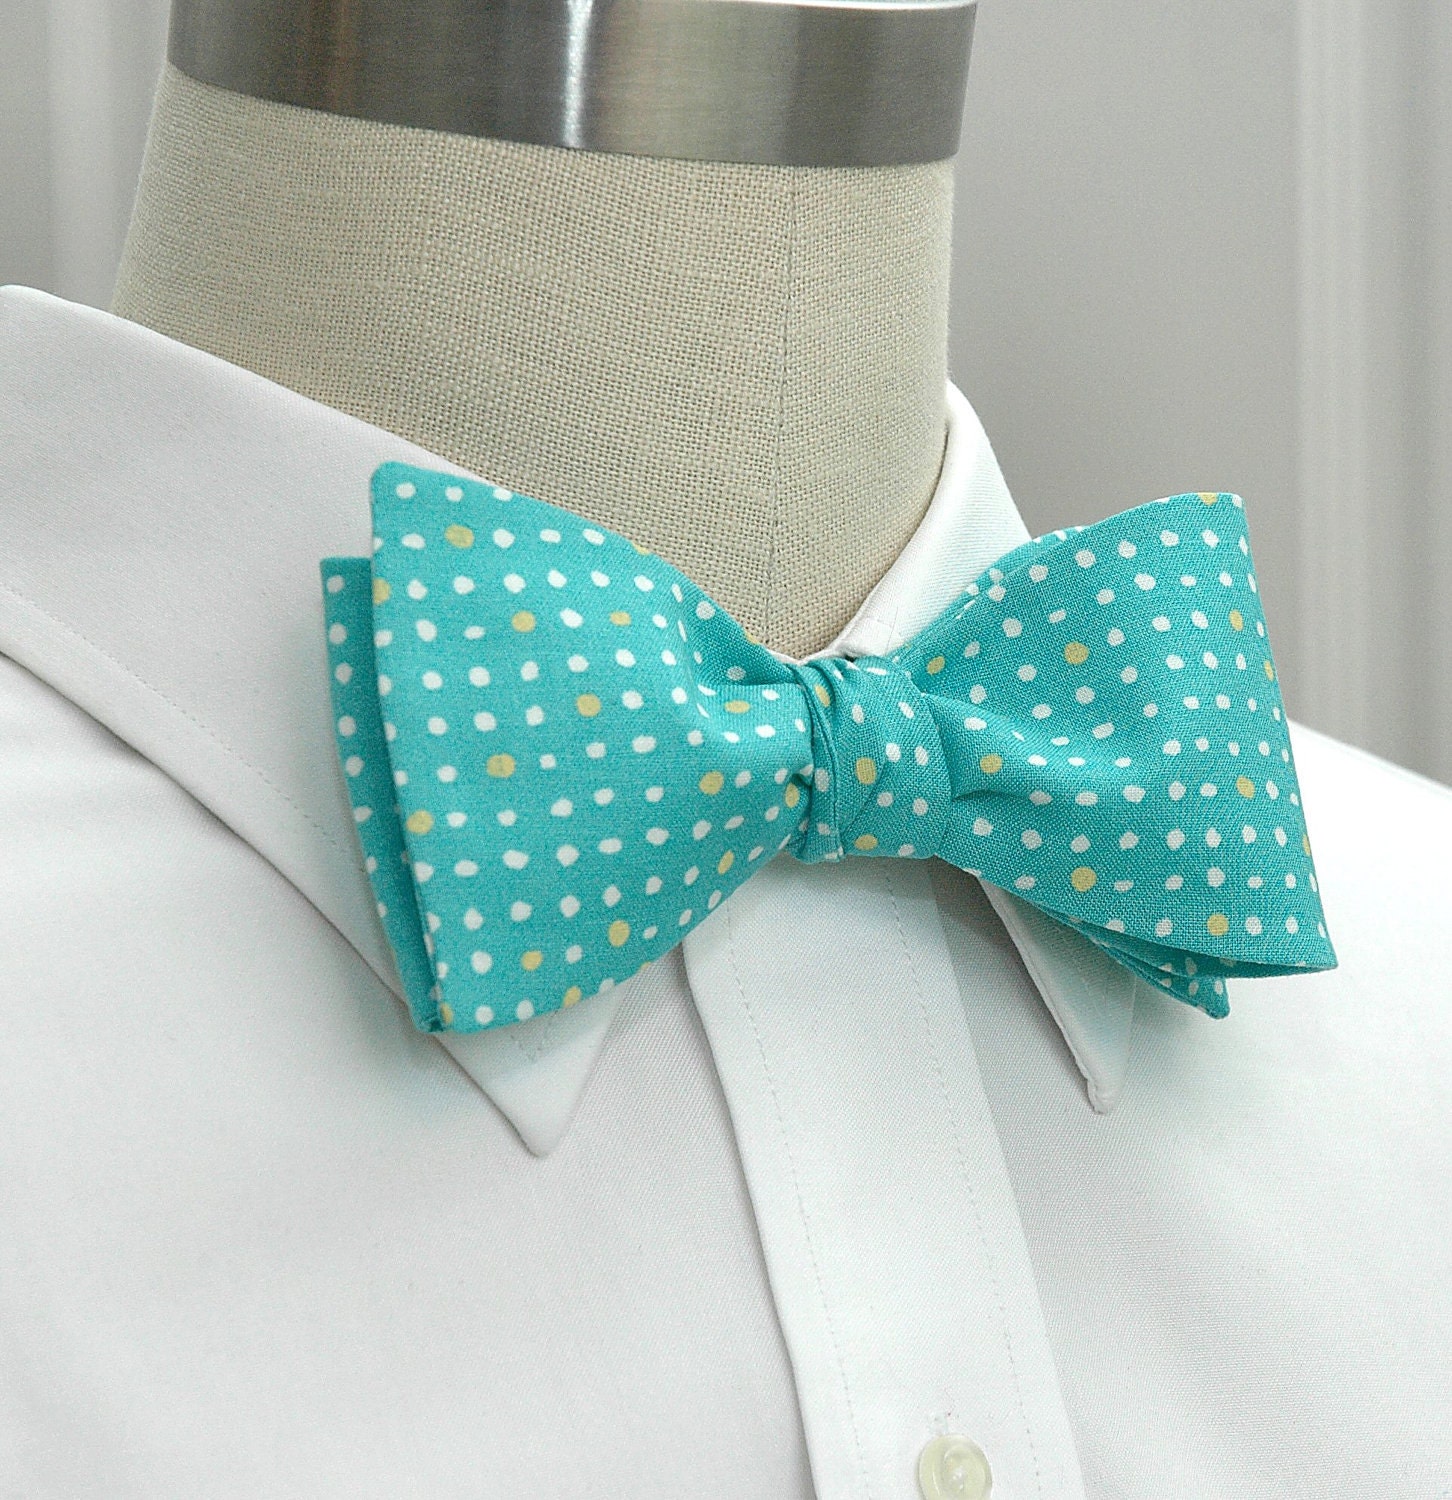 Men's Bow Tie in turquoise with white and yellow dots